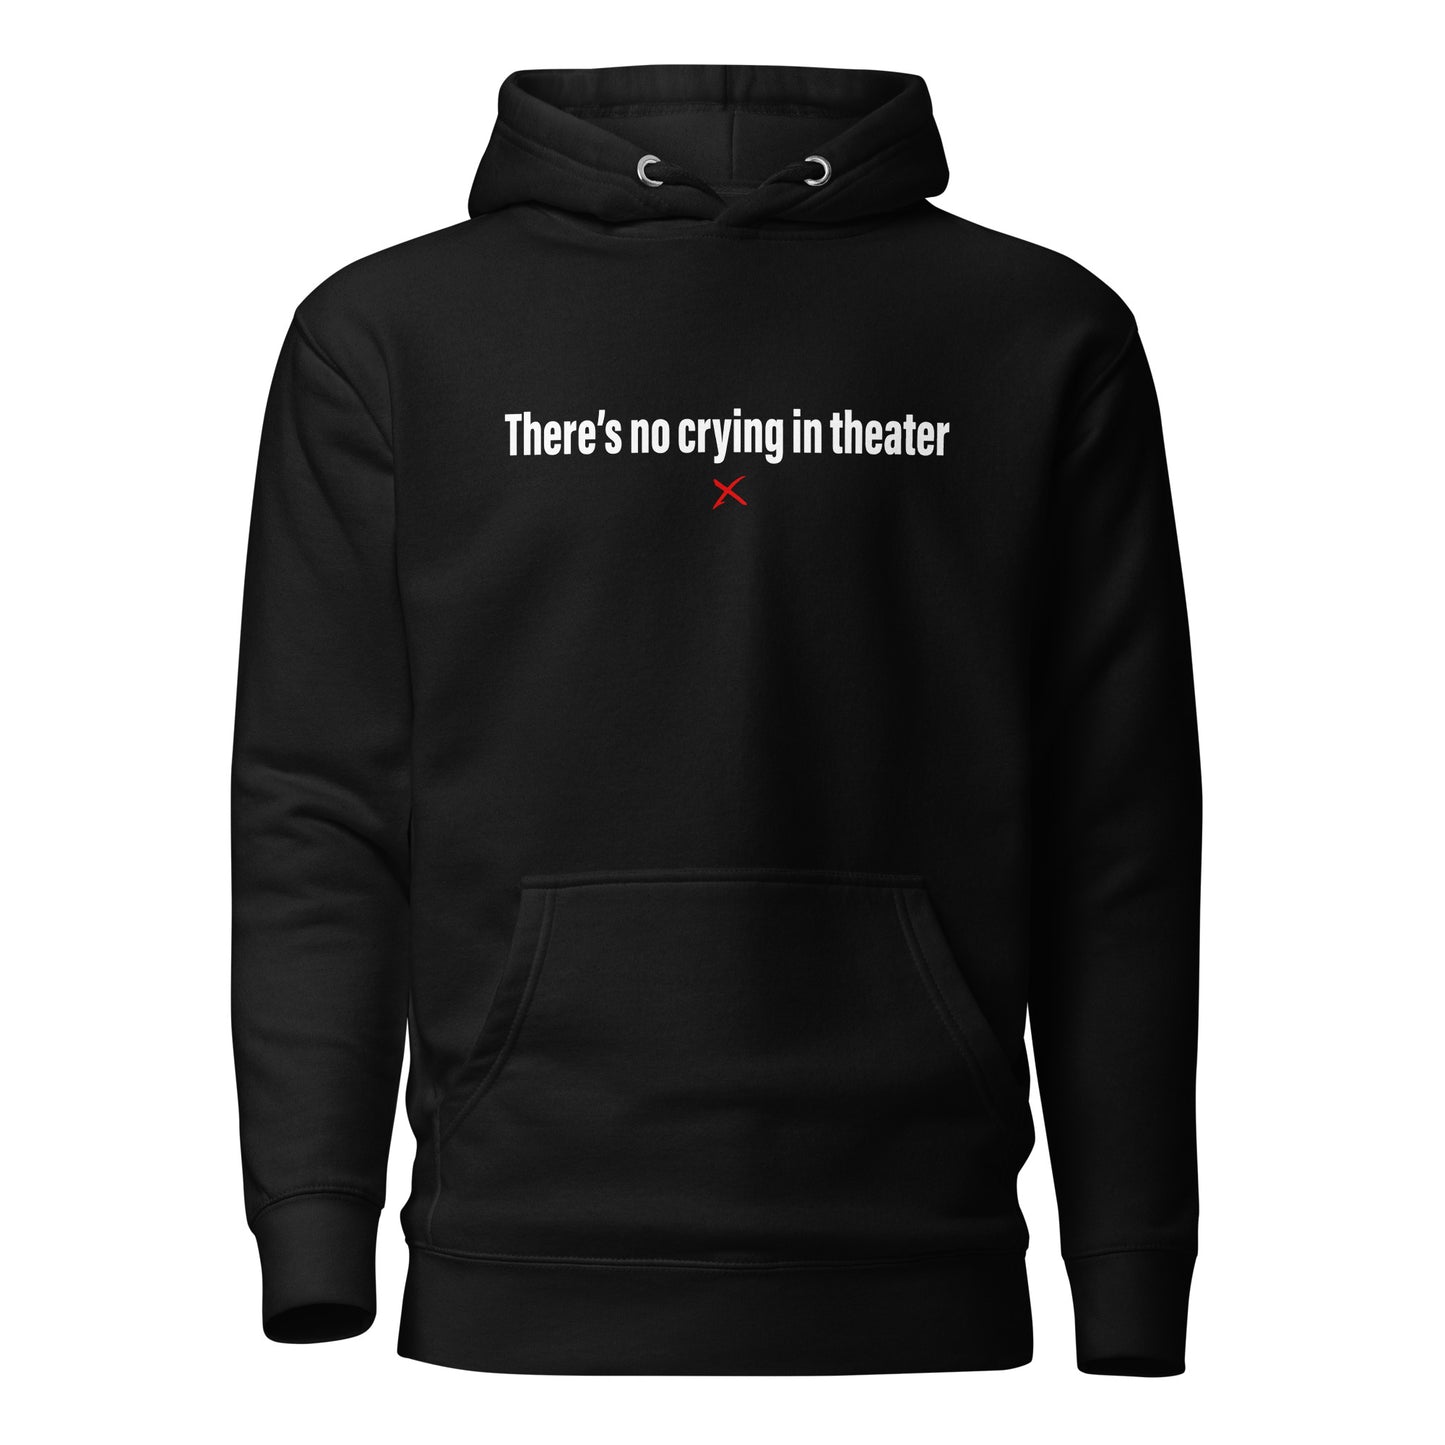 There's no crying in theater - Hoodie